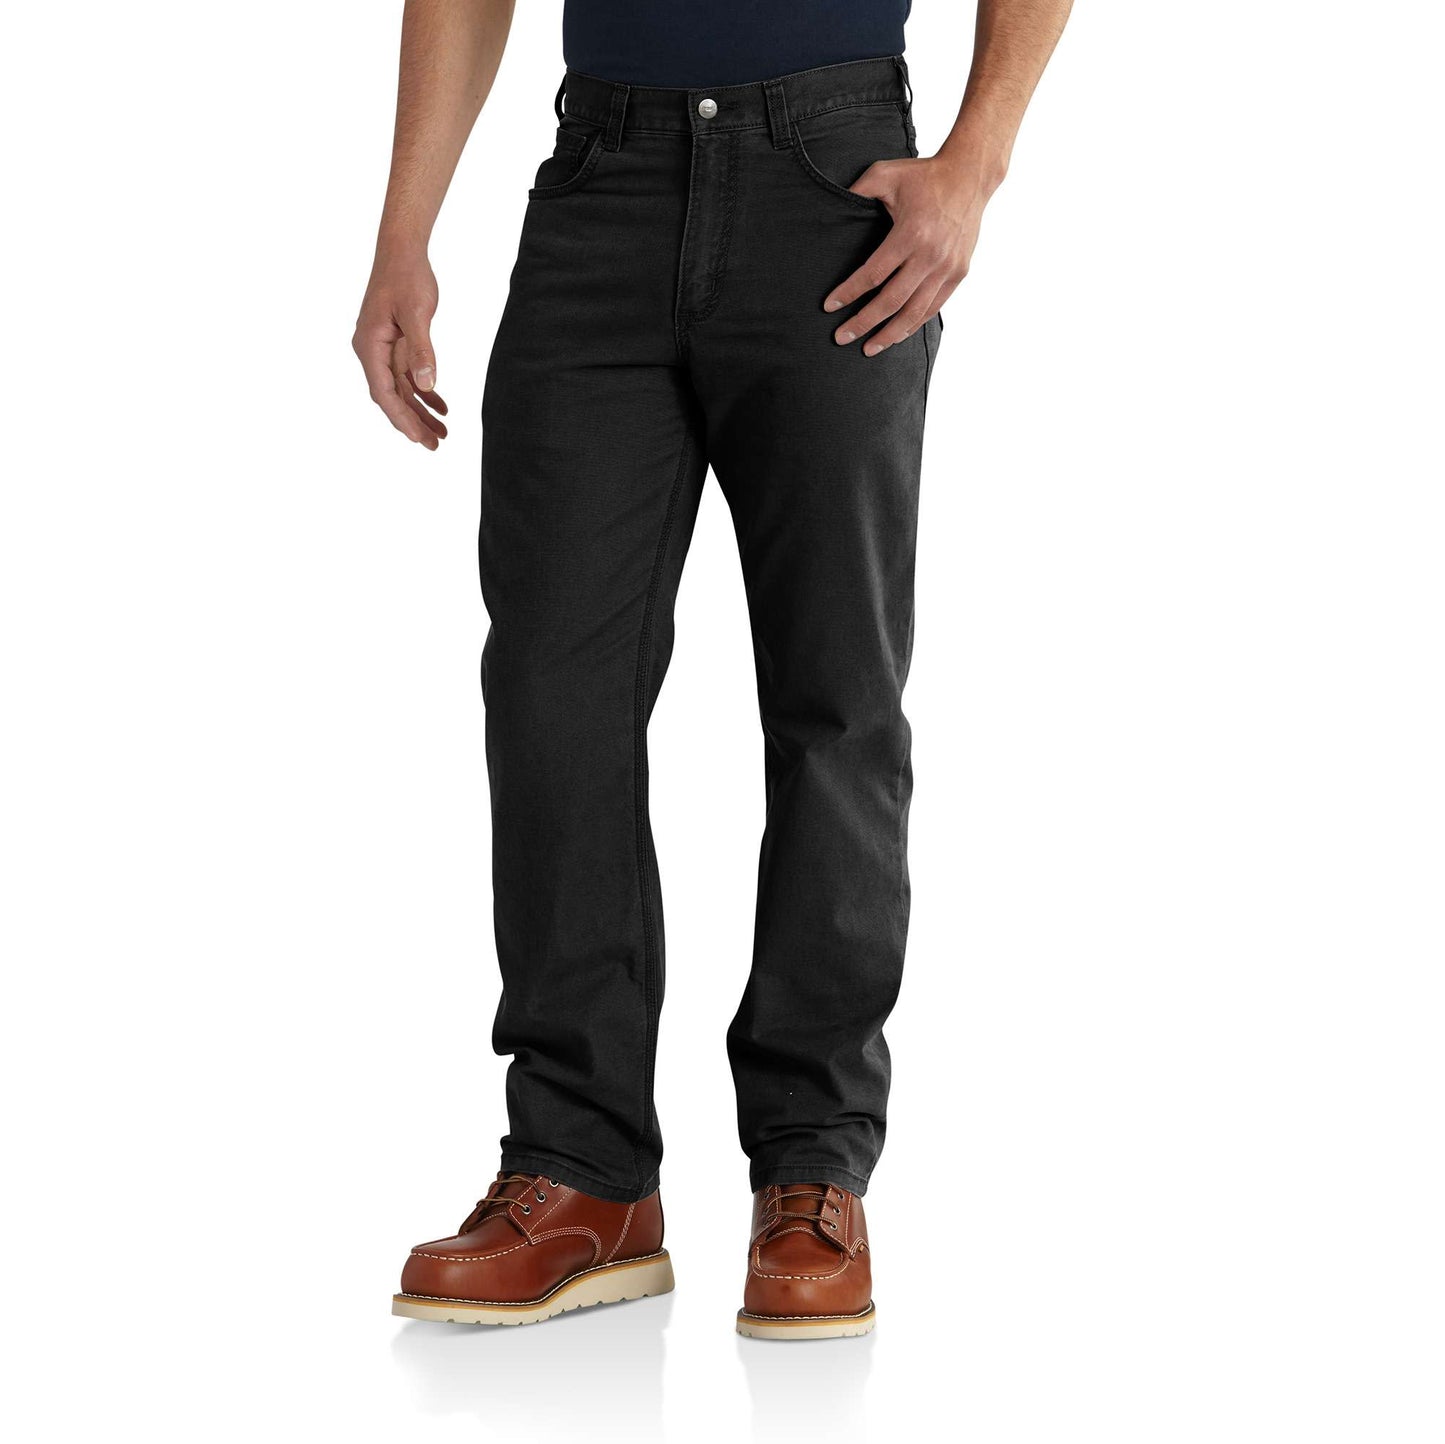 Carhartt Men's Rugged Flex Rigby Relaxed Fit 5 Pocket Work Pants